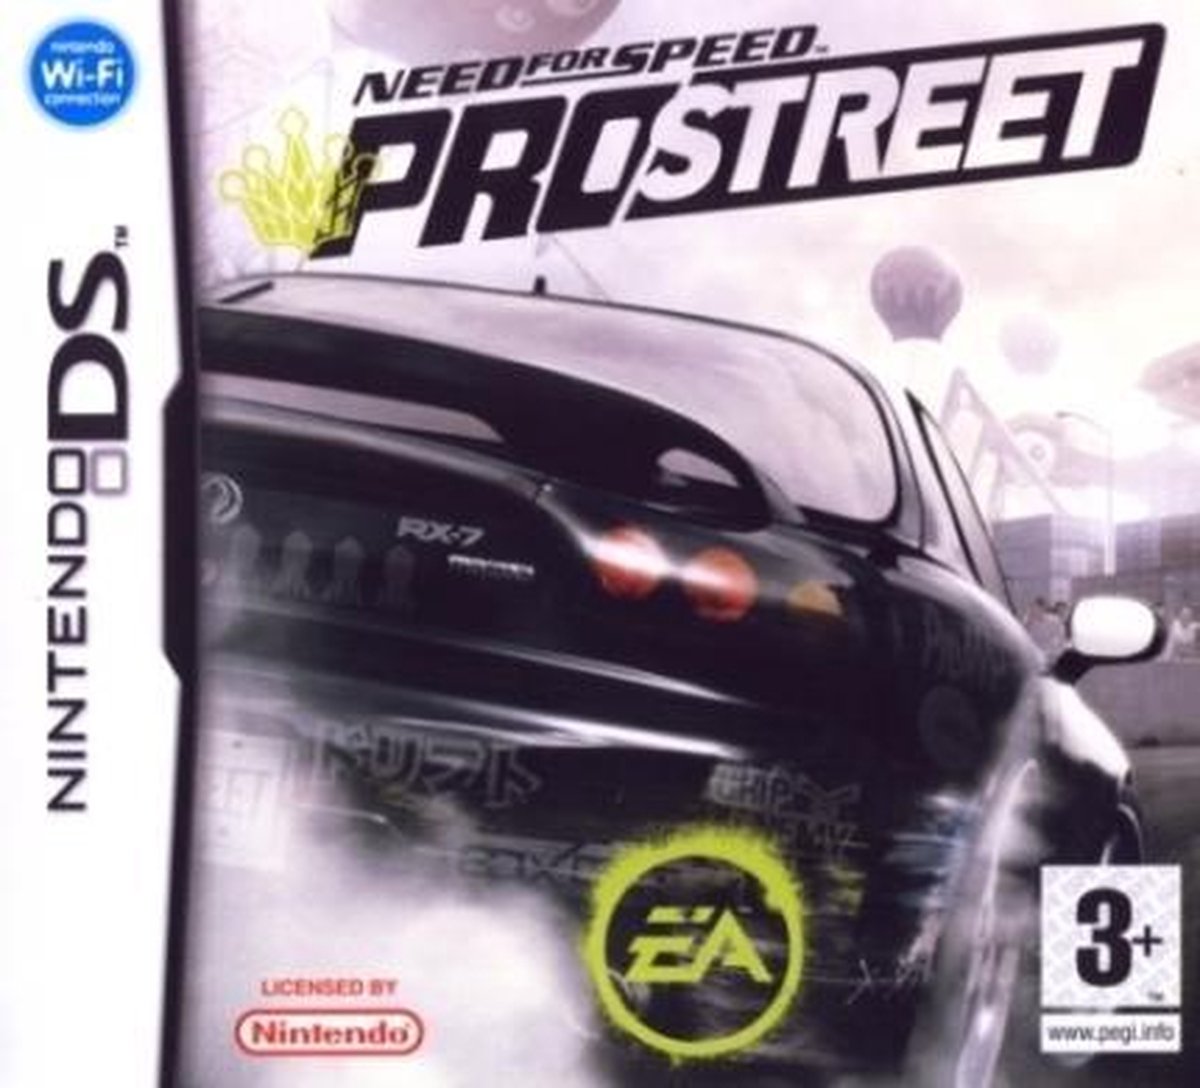 Electronic Arts Need for Speed Pro Street